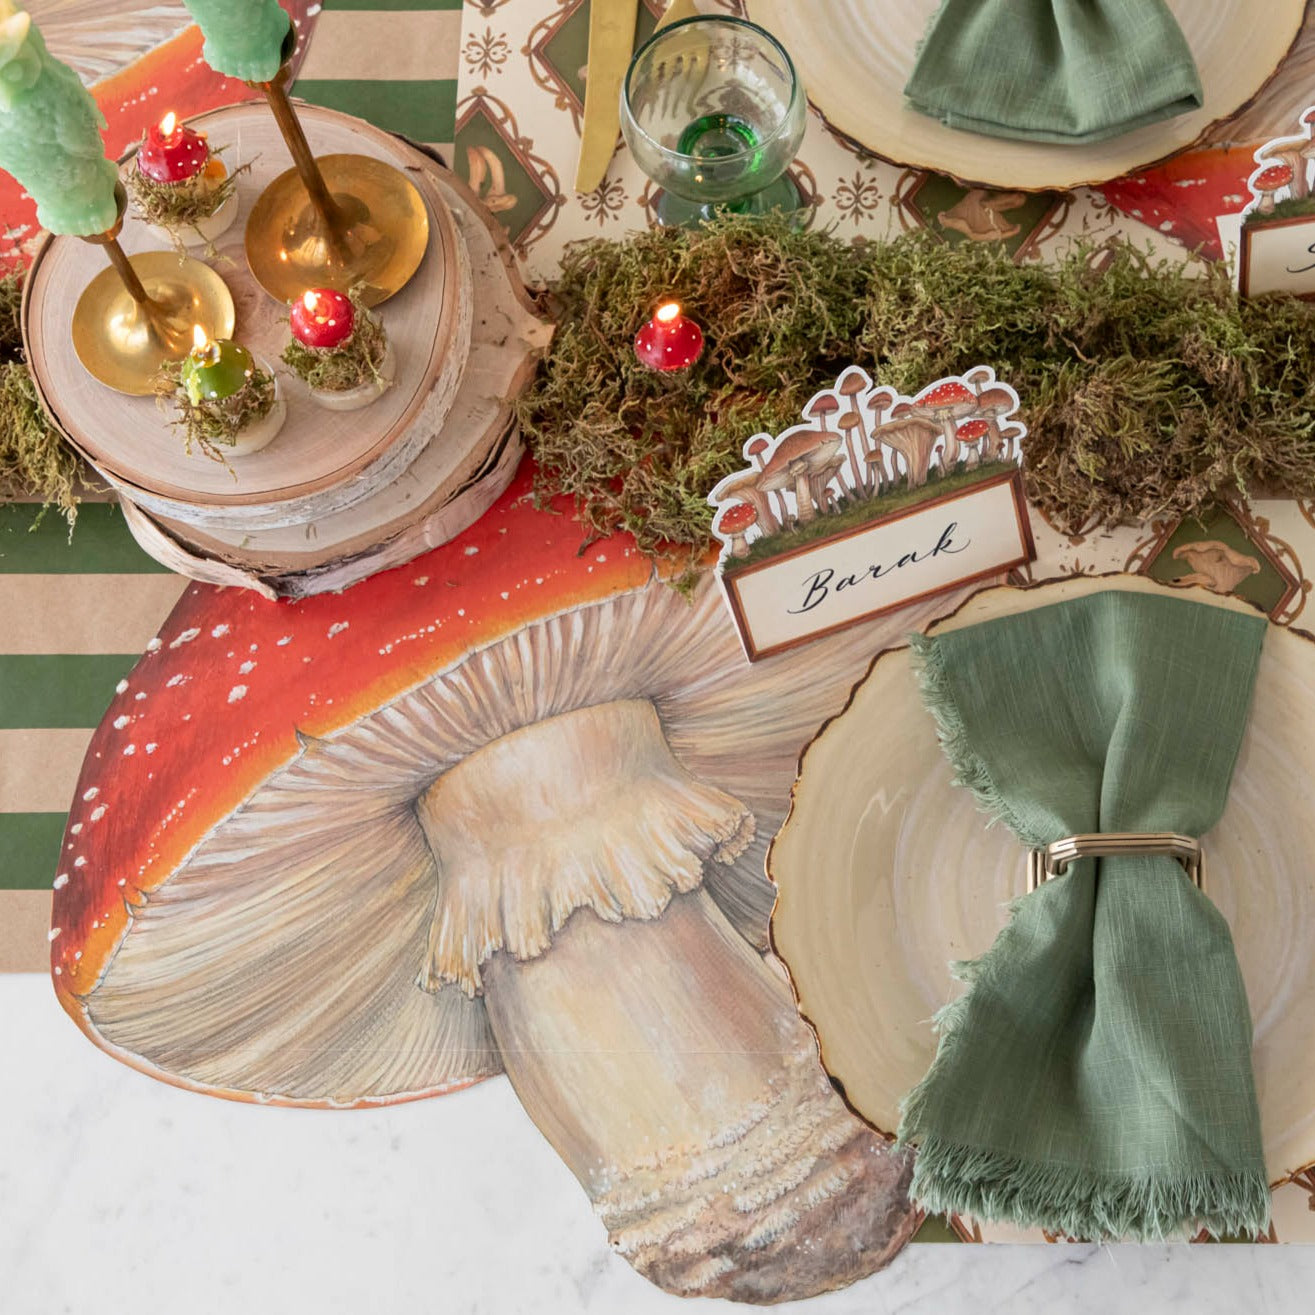 A die-cut mushroom placemat is placed on a kraft green runner, surrounded by moss, with a plate topped with a green napkin.